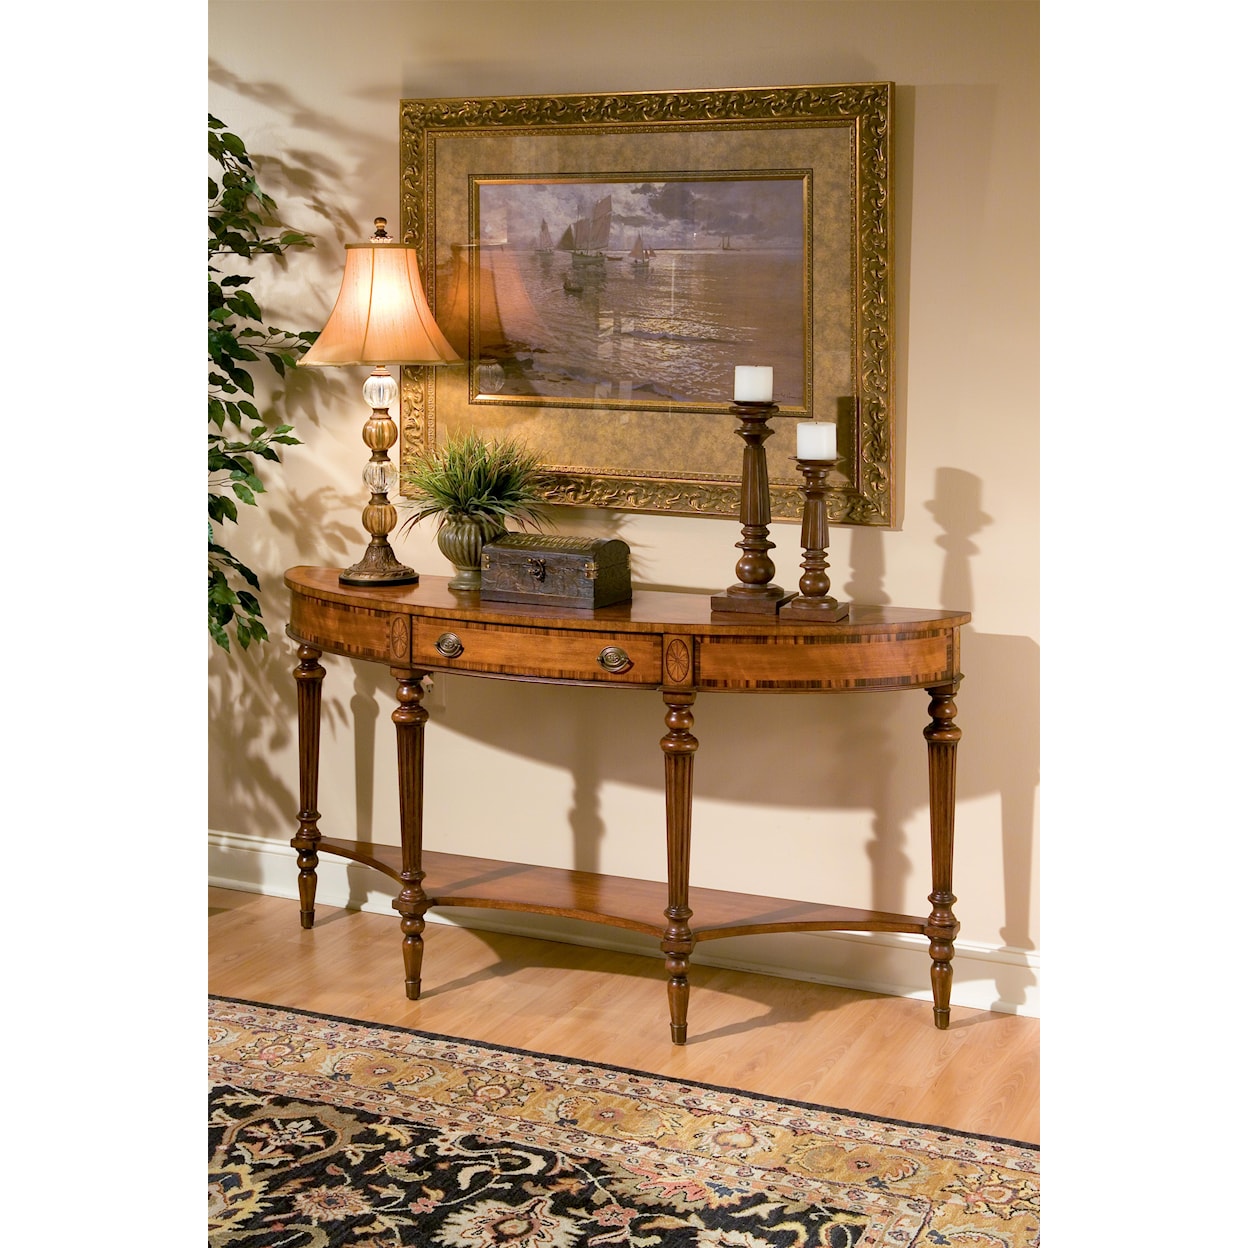 Butler Specialty Company Connoisseur's Demilune Console